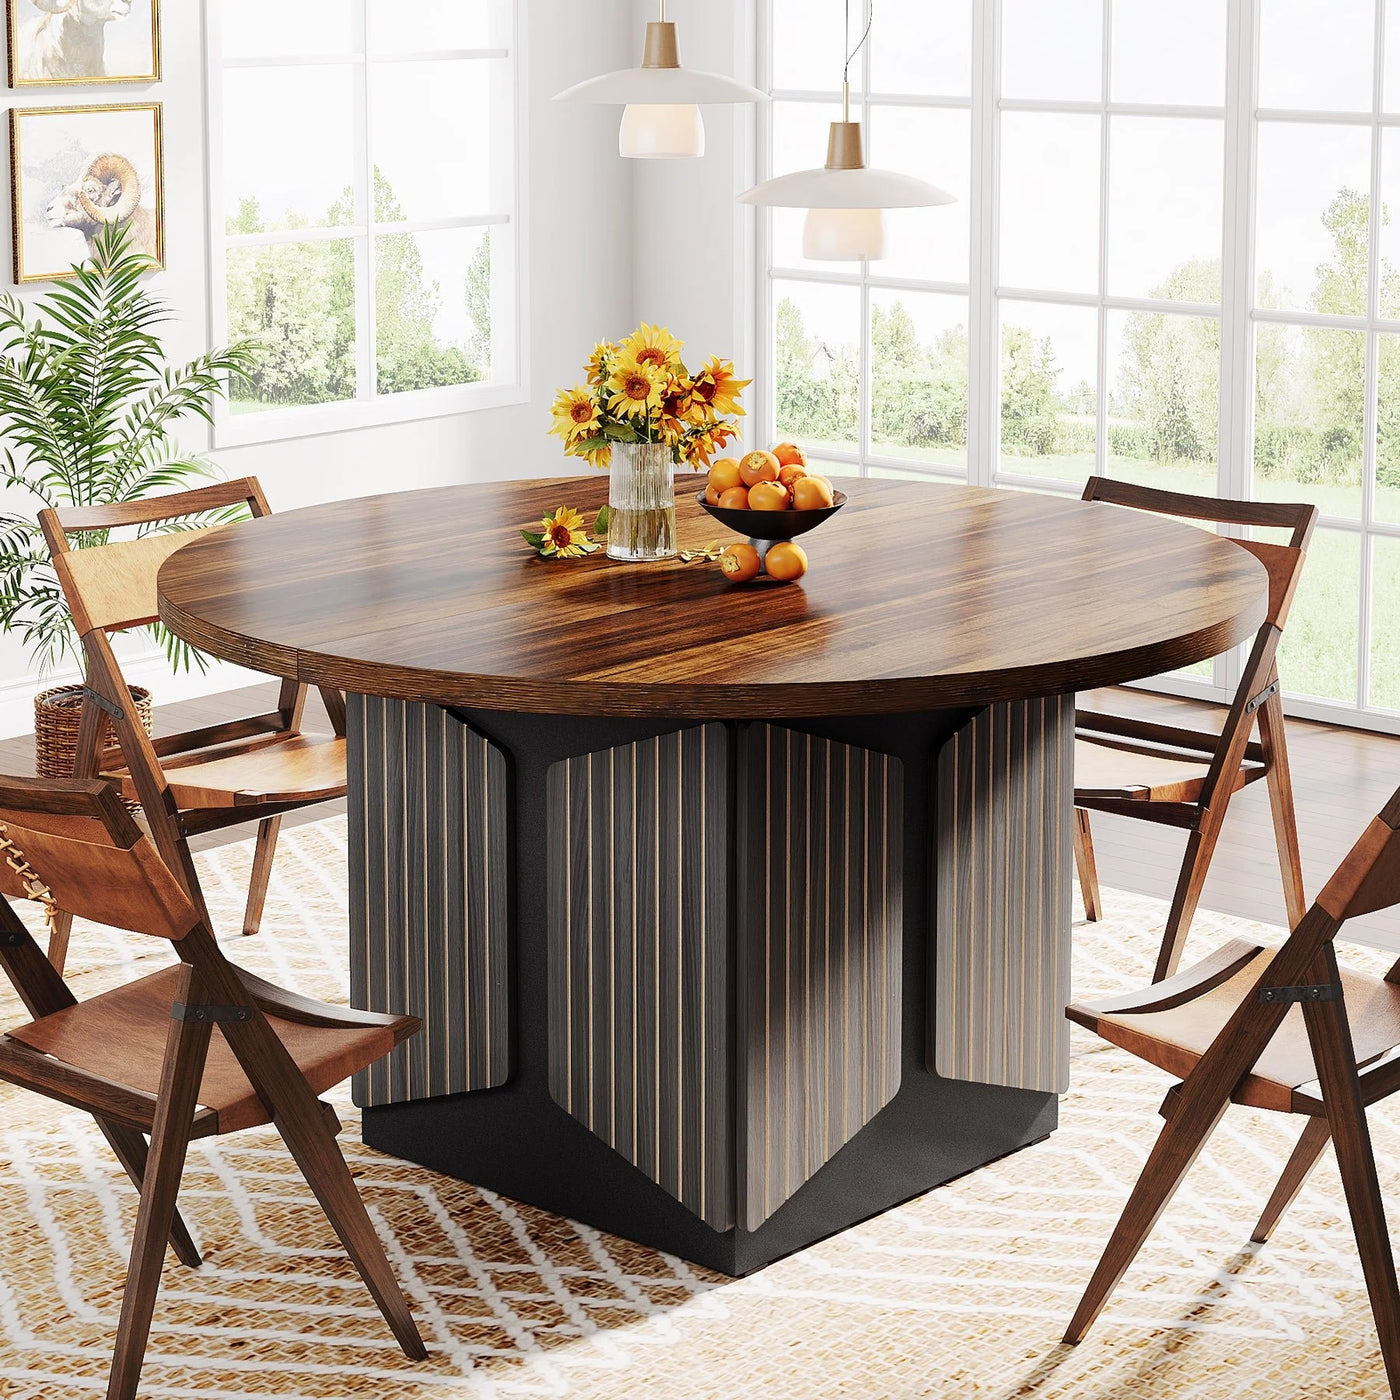 Solid 47" Round Dining Table | Farmhouse Circle Wood Kitchen Table for 4-6 People